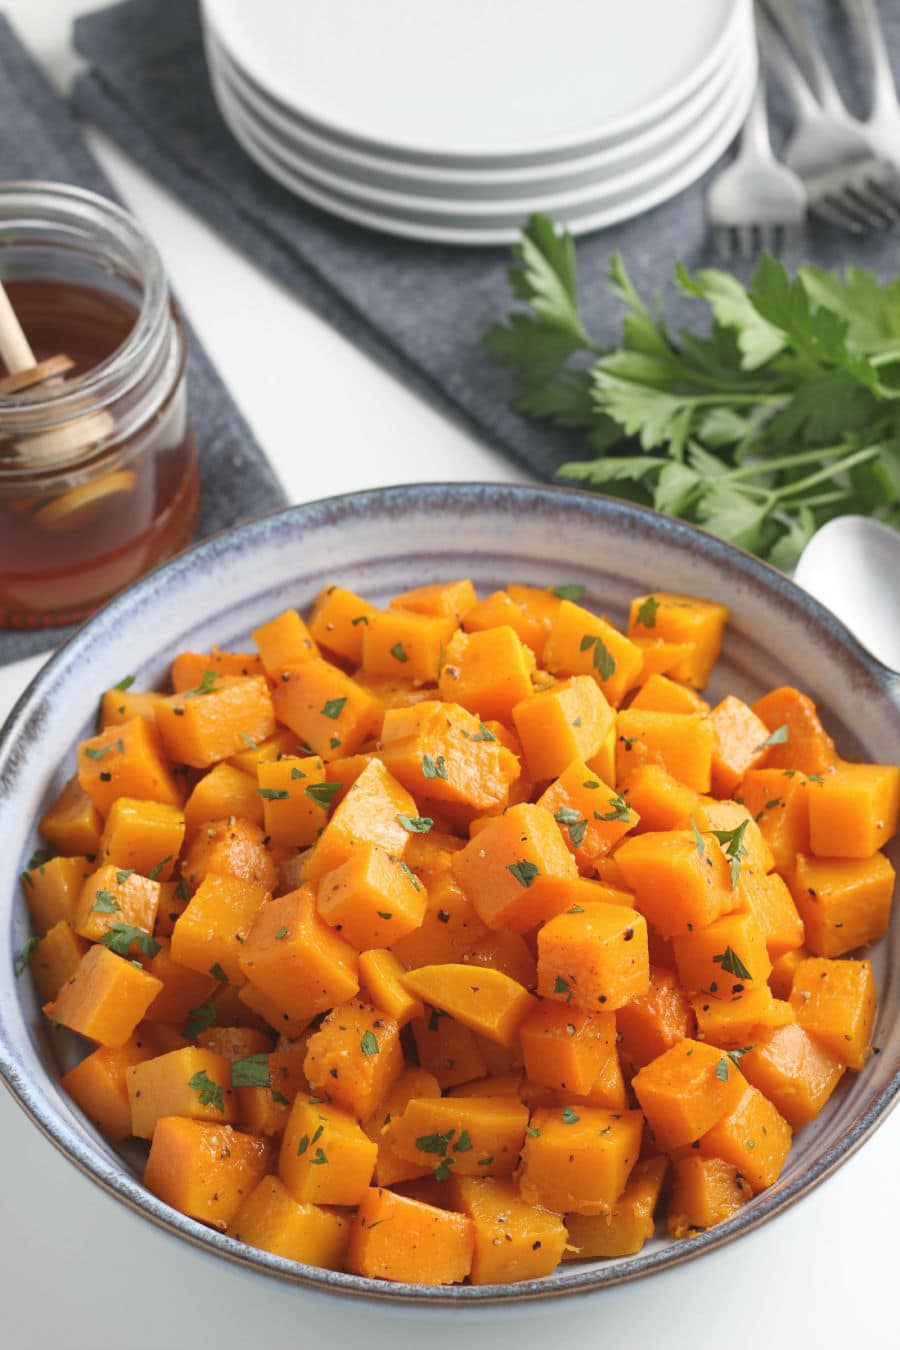 Roasted Butternut Squash with Parsley in Bowl